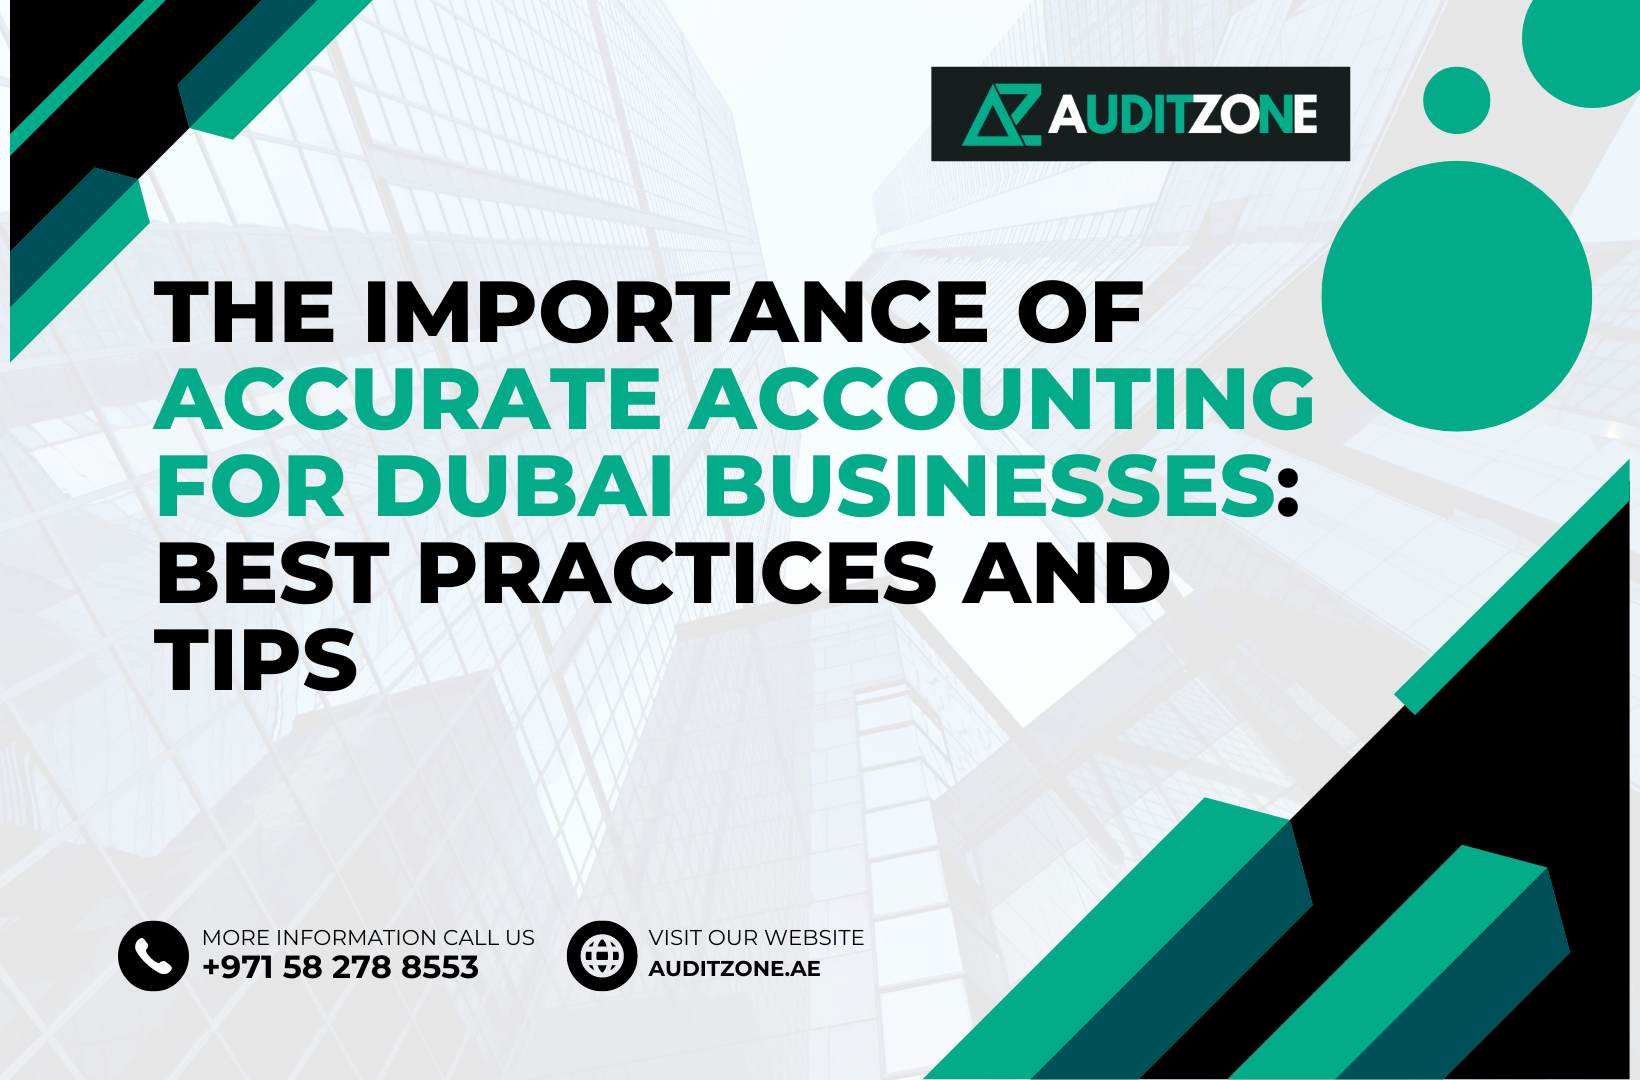 The Importance of Accurate Accounting for Dubai Businesses Best Practices and Tips